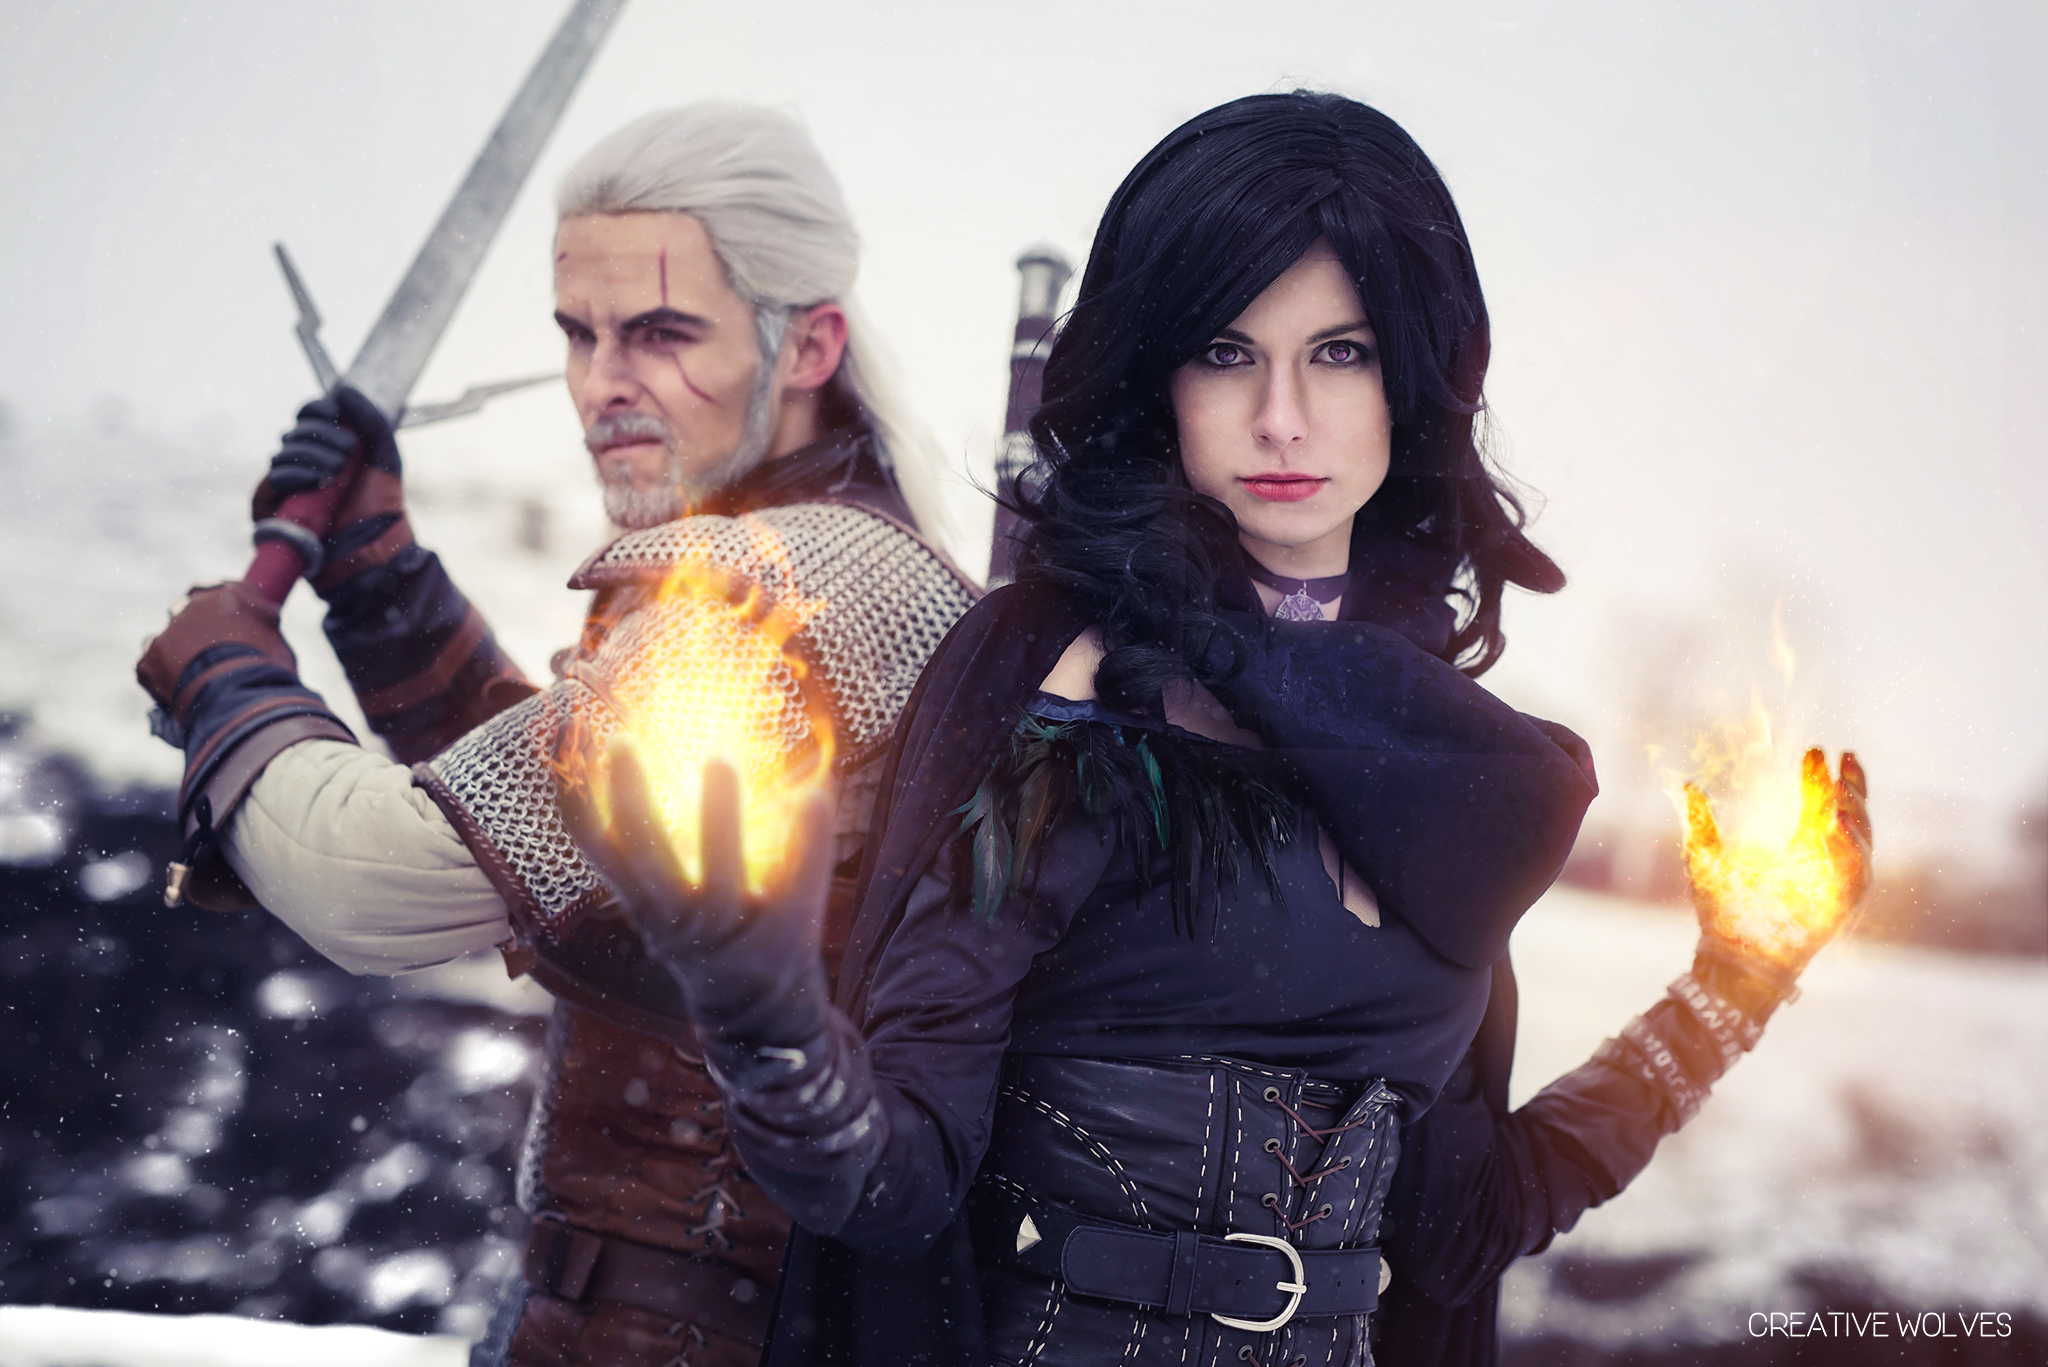 Yennefer DLC / Photo by Creative Wolves